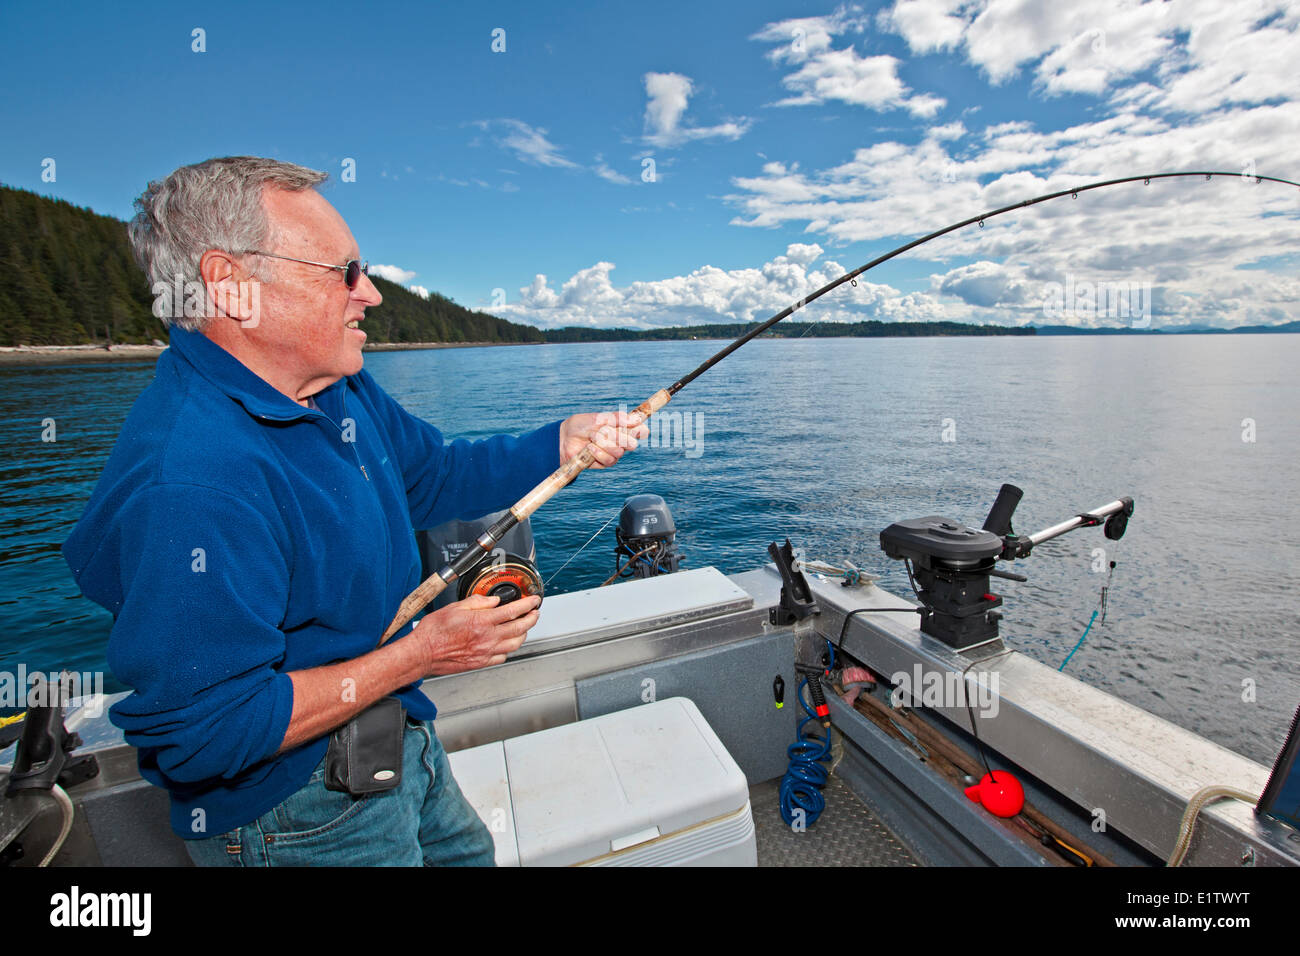 Senior retired man fishing with fishing rod in his hands off Northern Vancouver Island in British Columbia, Canada. Stock Photo